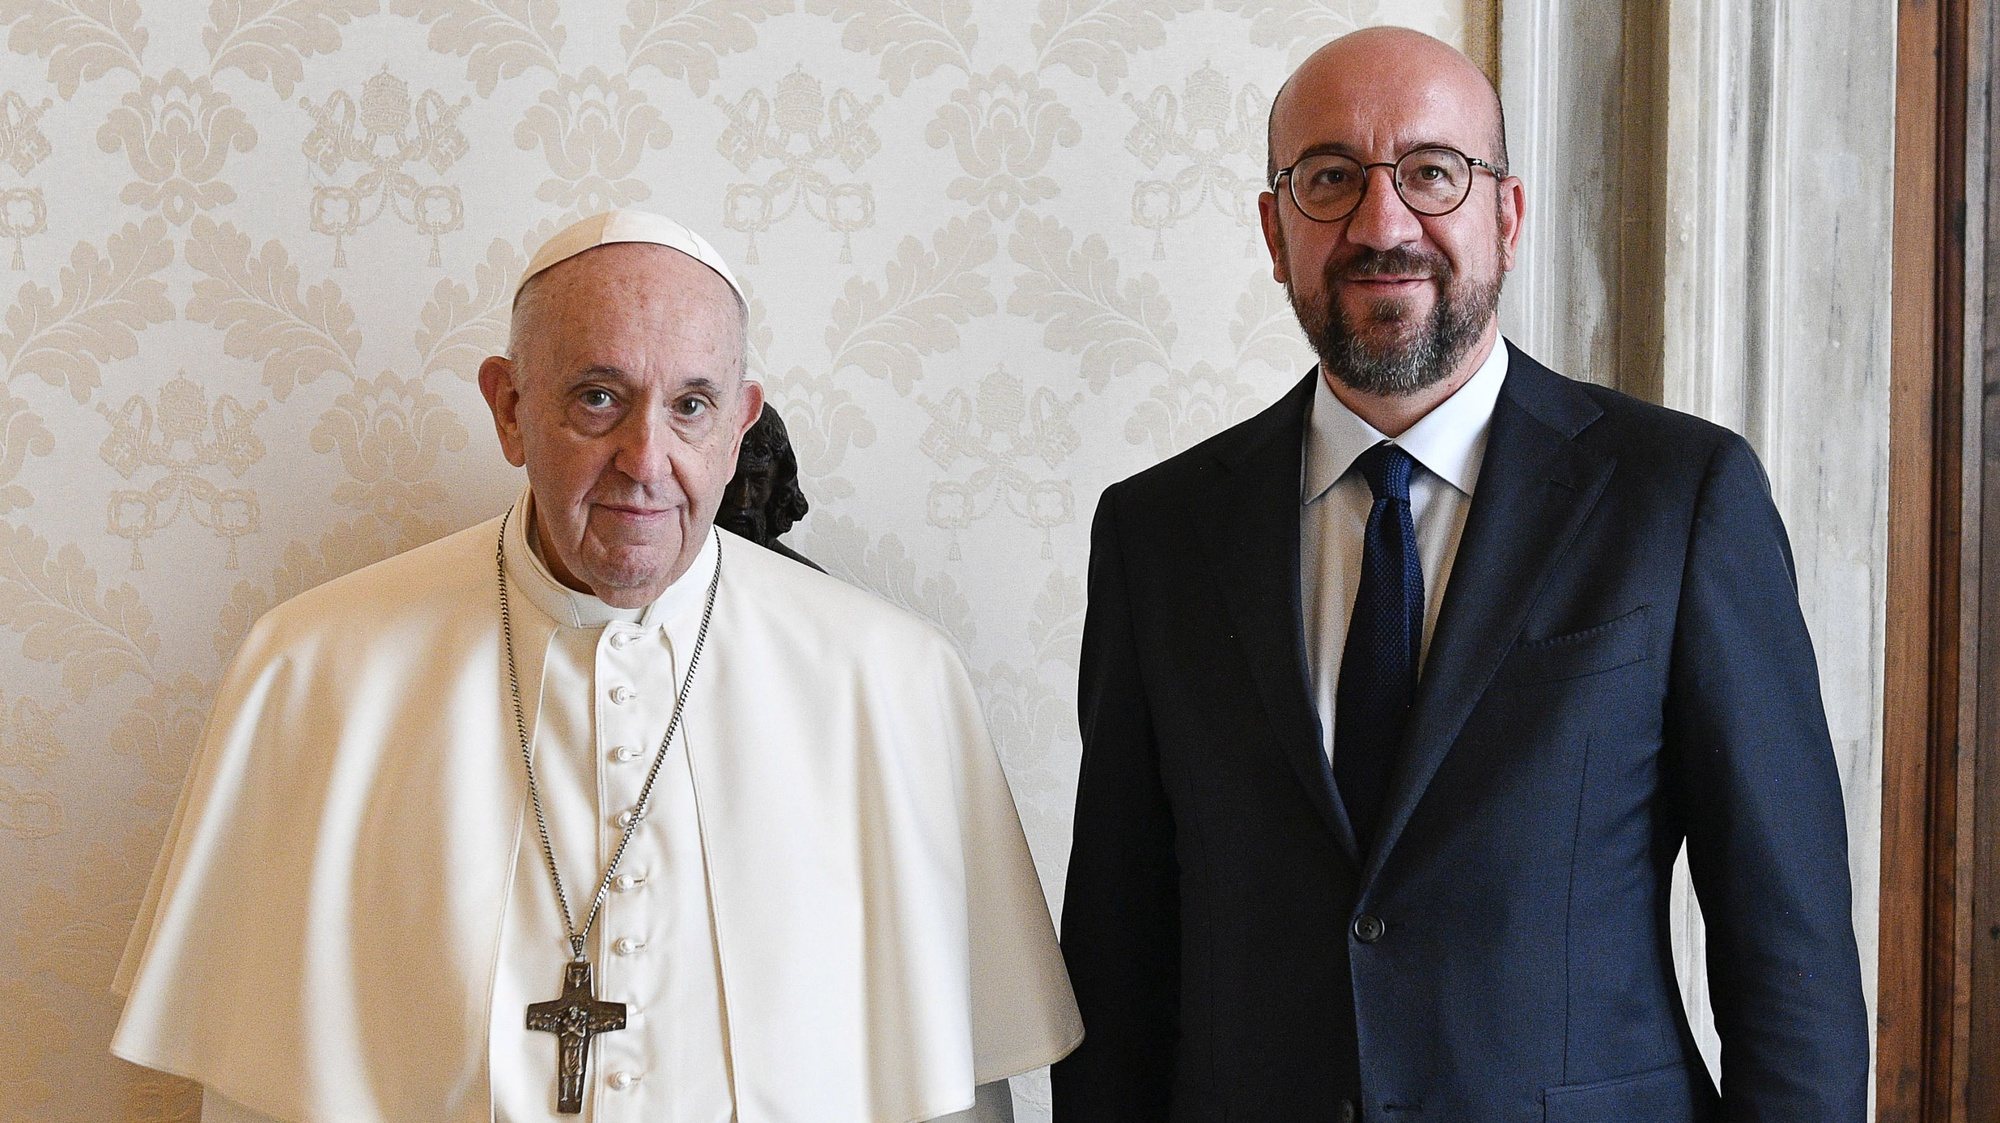 epa09460685 A handout picture provided by the Vatican Media shows Pope Francis (L) and European Council President Charles Michel (R) posing for a photograph during their meeting in Vatican City, 11 September 2021.  EPA/VATICAN MEDIA HANDOUT  HANDOUT EDITORIAL USE ONLY/NO SALES